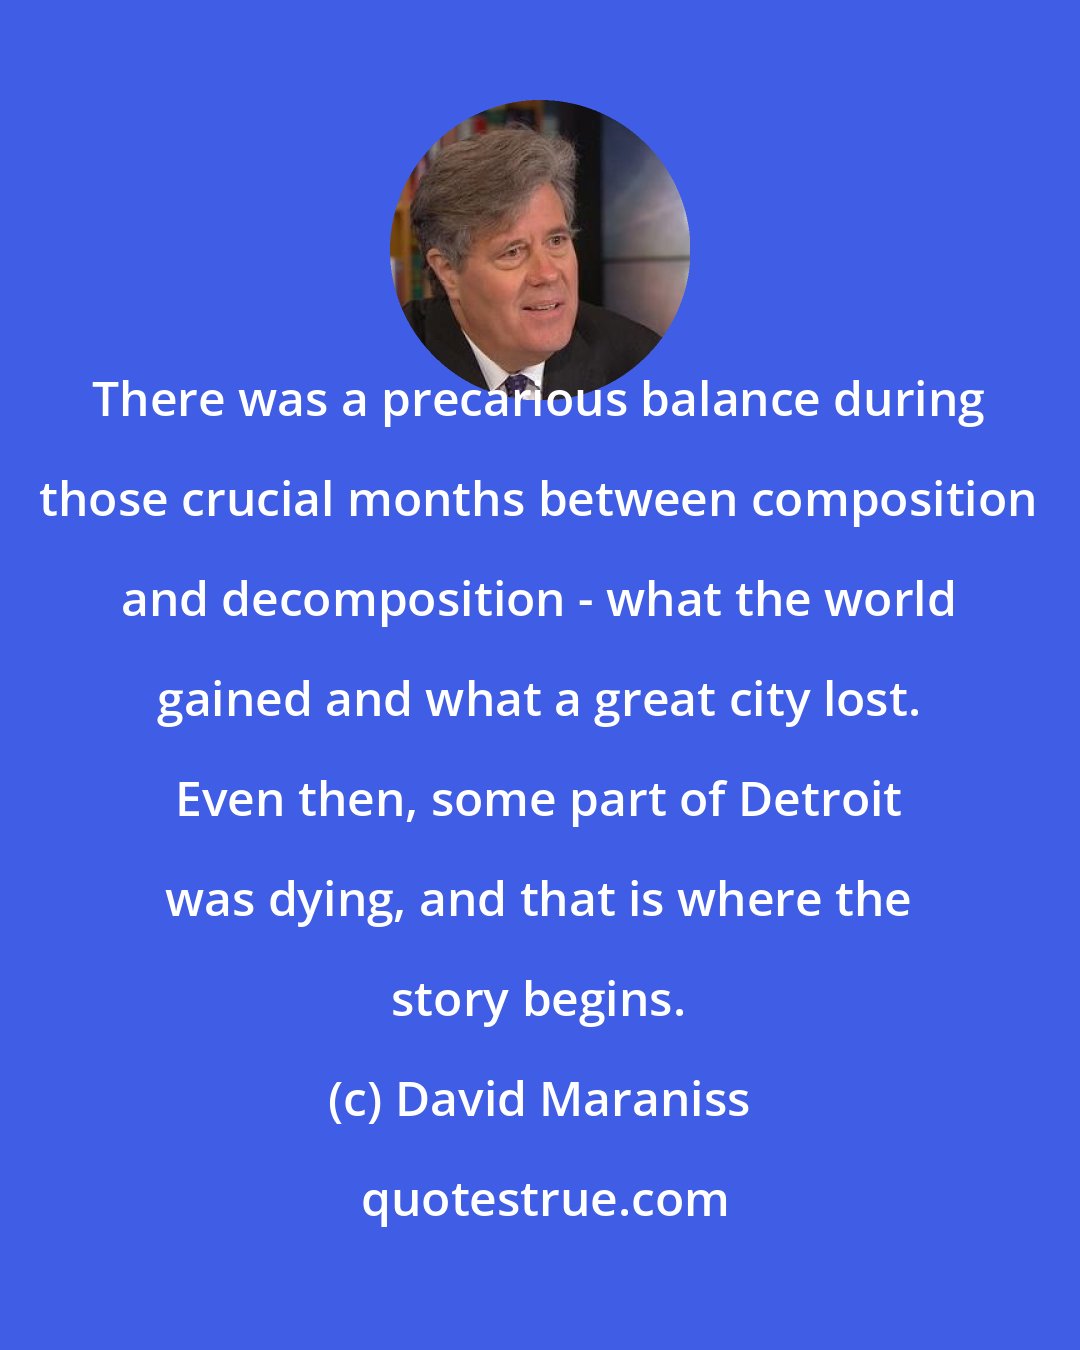 David Maraniss: There was a precarious balance during those crucial months between composition and decomposition - what the world gained and what a great city lost. Even then, some part of Detroit was dying, and that is where the story begins.